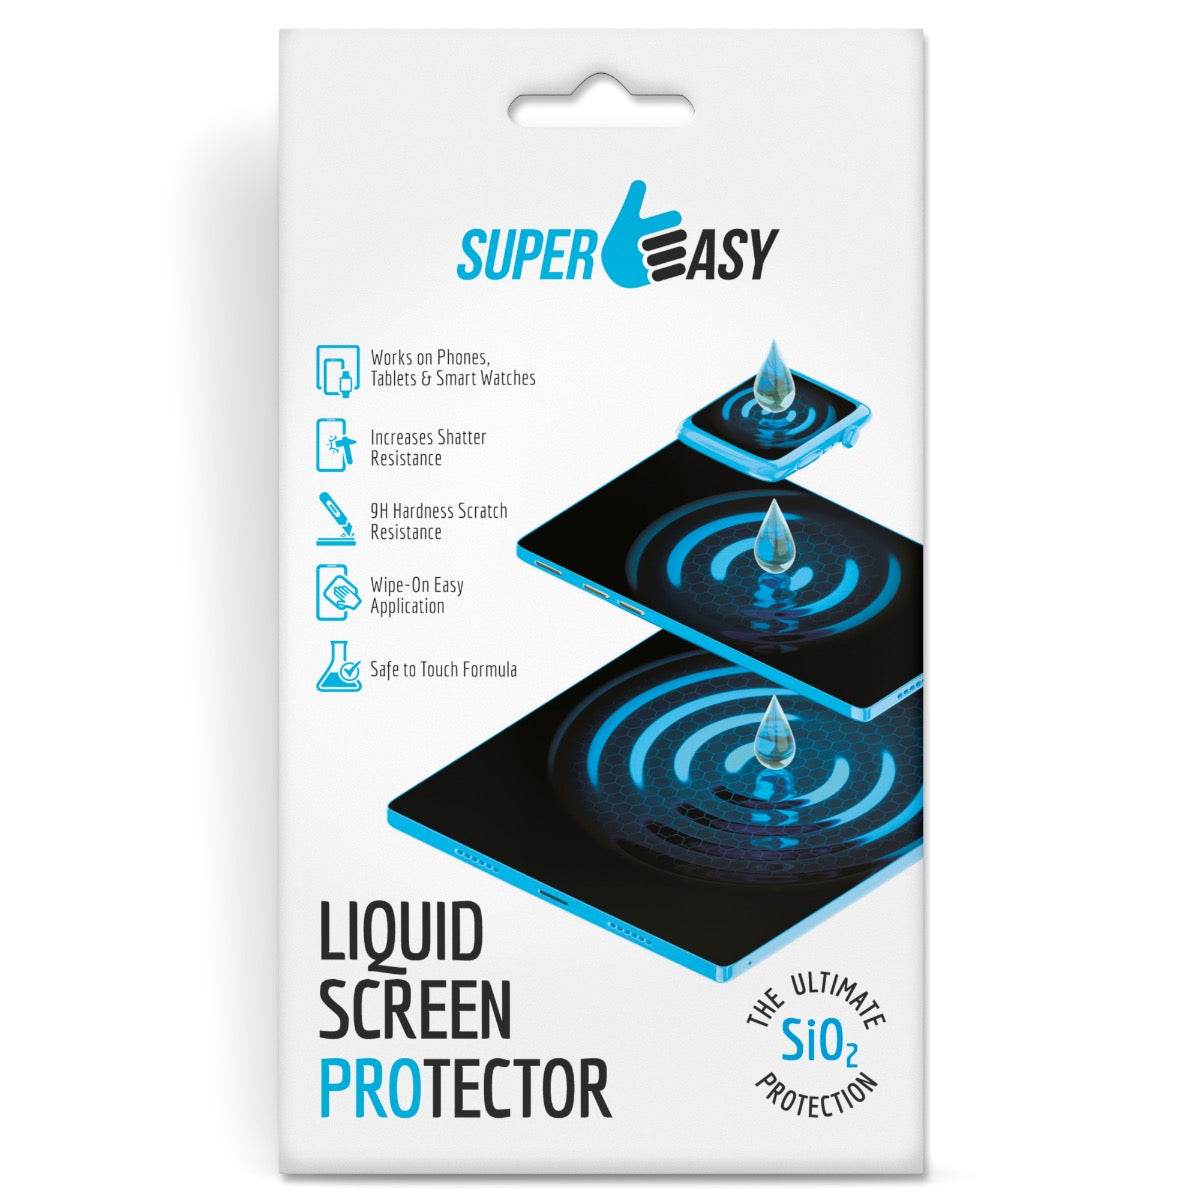 SUPER EASY Liquid Screen Protector for All Phones Tablets and Smart Watches